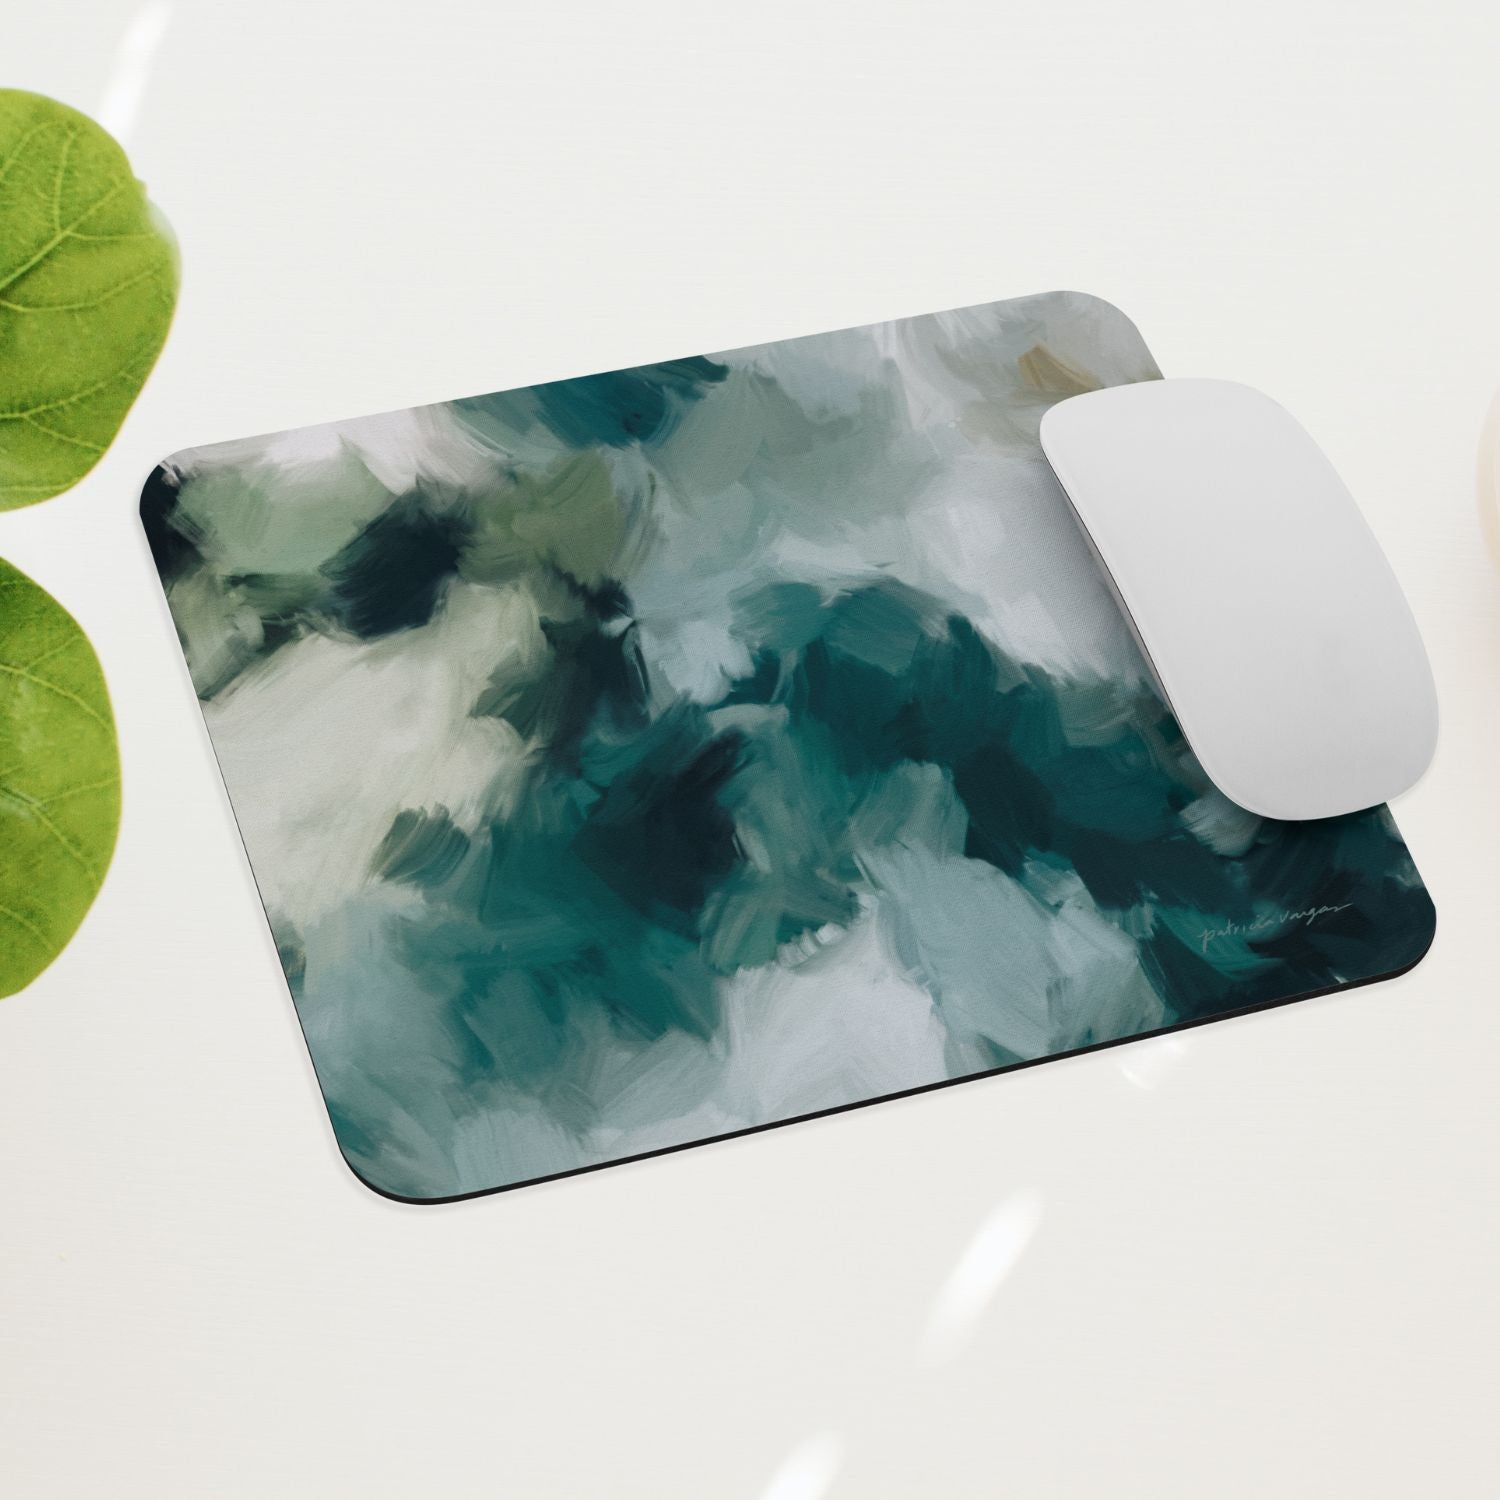 Echo, emerald green mouse pad for styling your office desk. Featuring artwork by Parima Studio. Home office styling accessories, cubicle styling accessories.